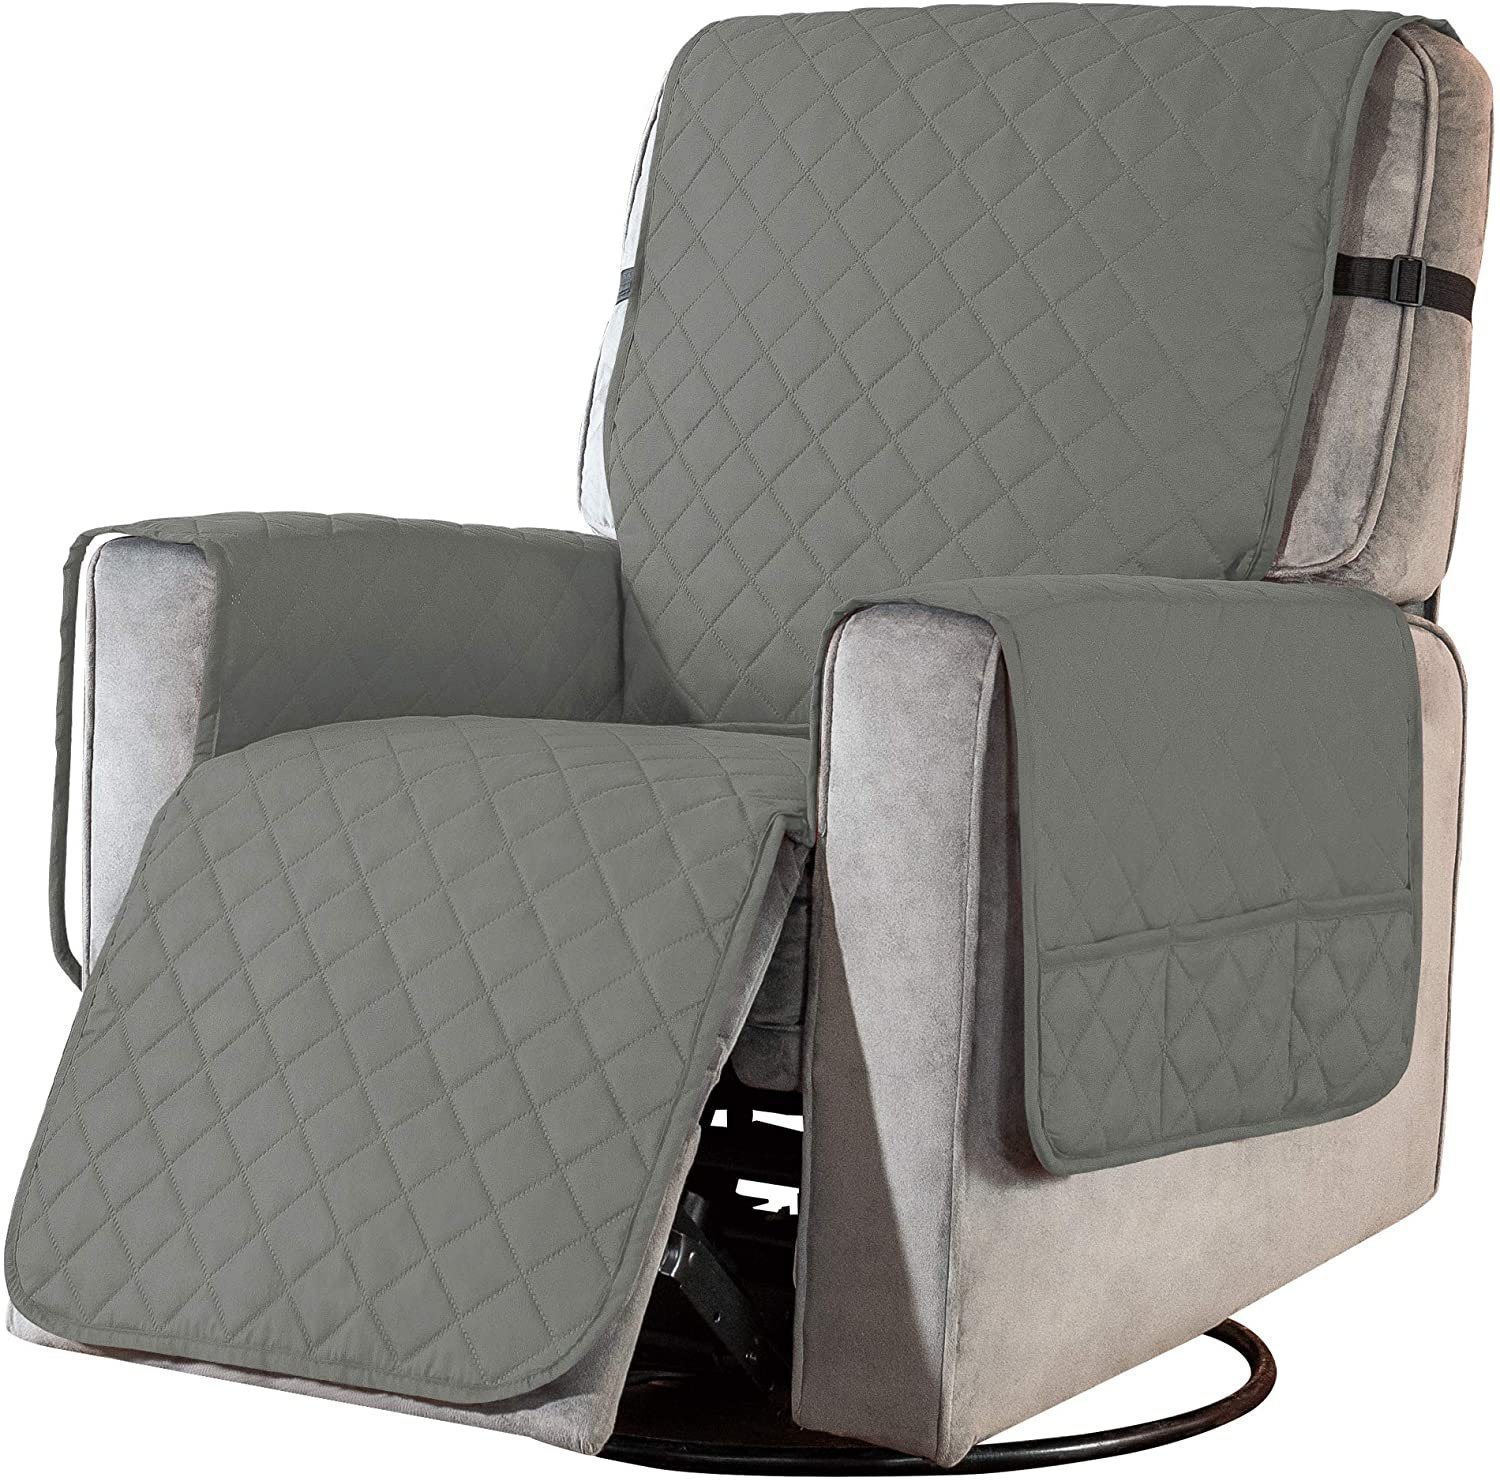 🔥 Promotion 40% OFF-Recliner Chair Cover🔥